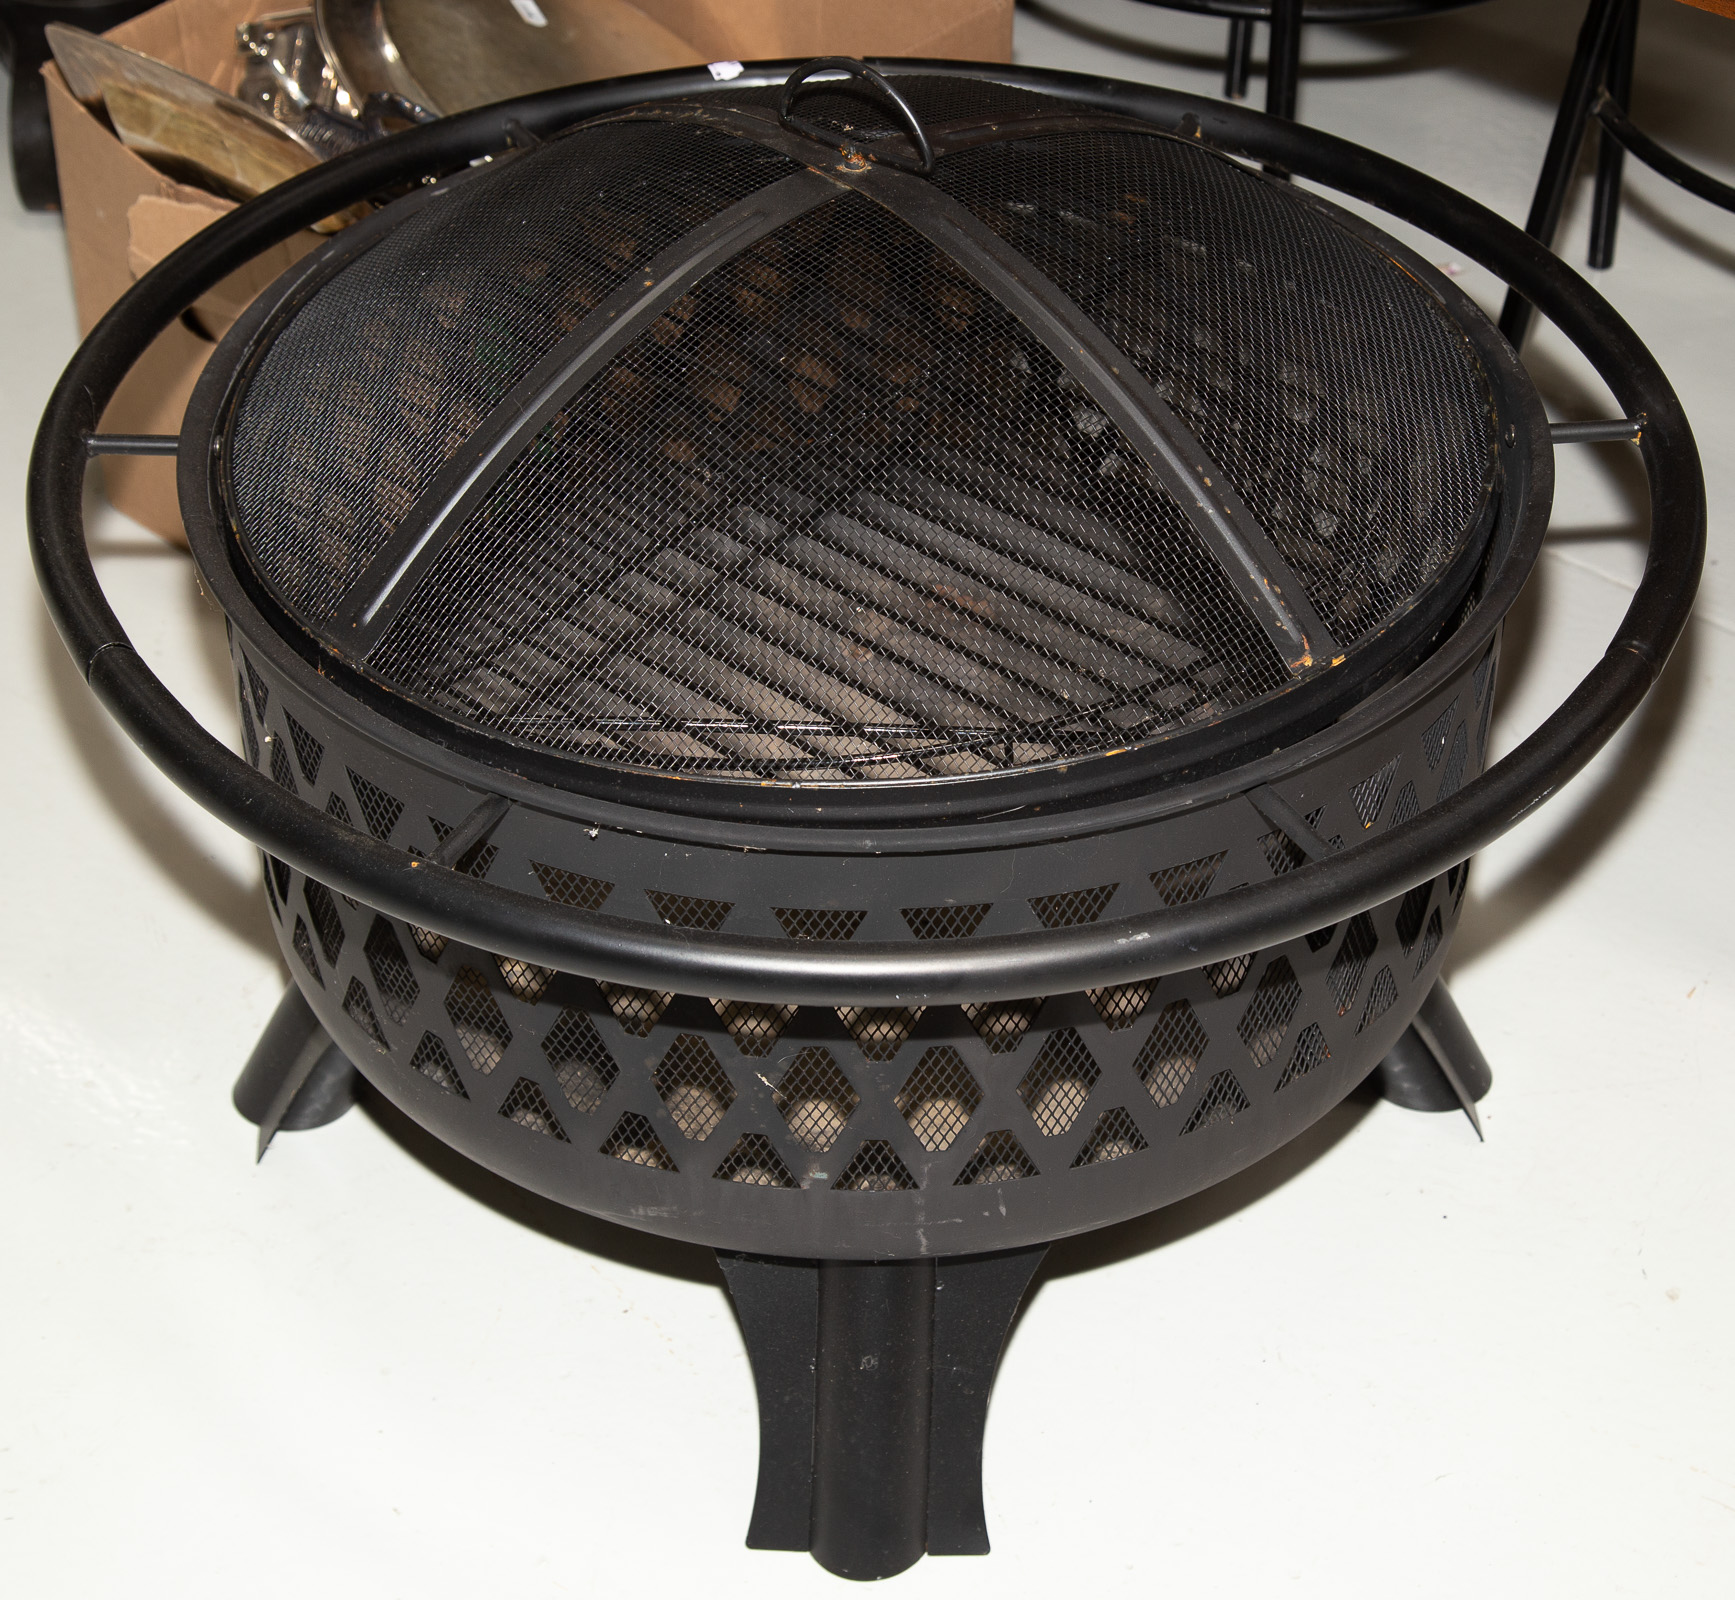 CONTEMPORARY FIRE PIT With cooking grill